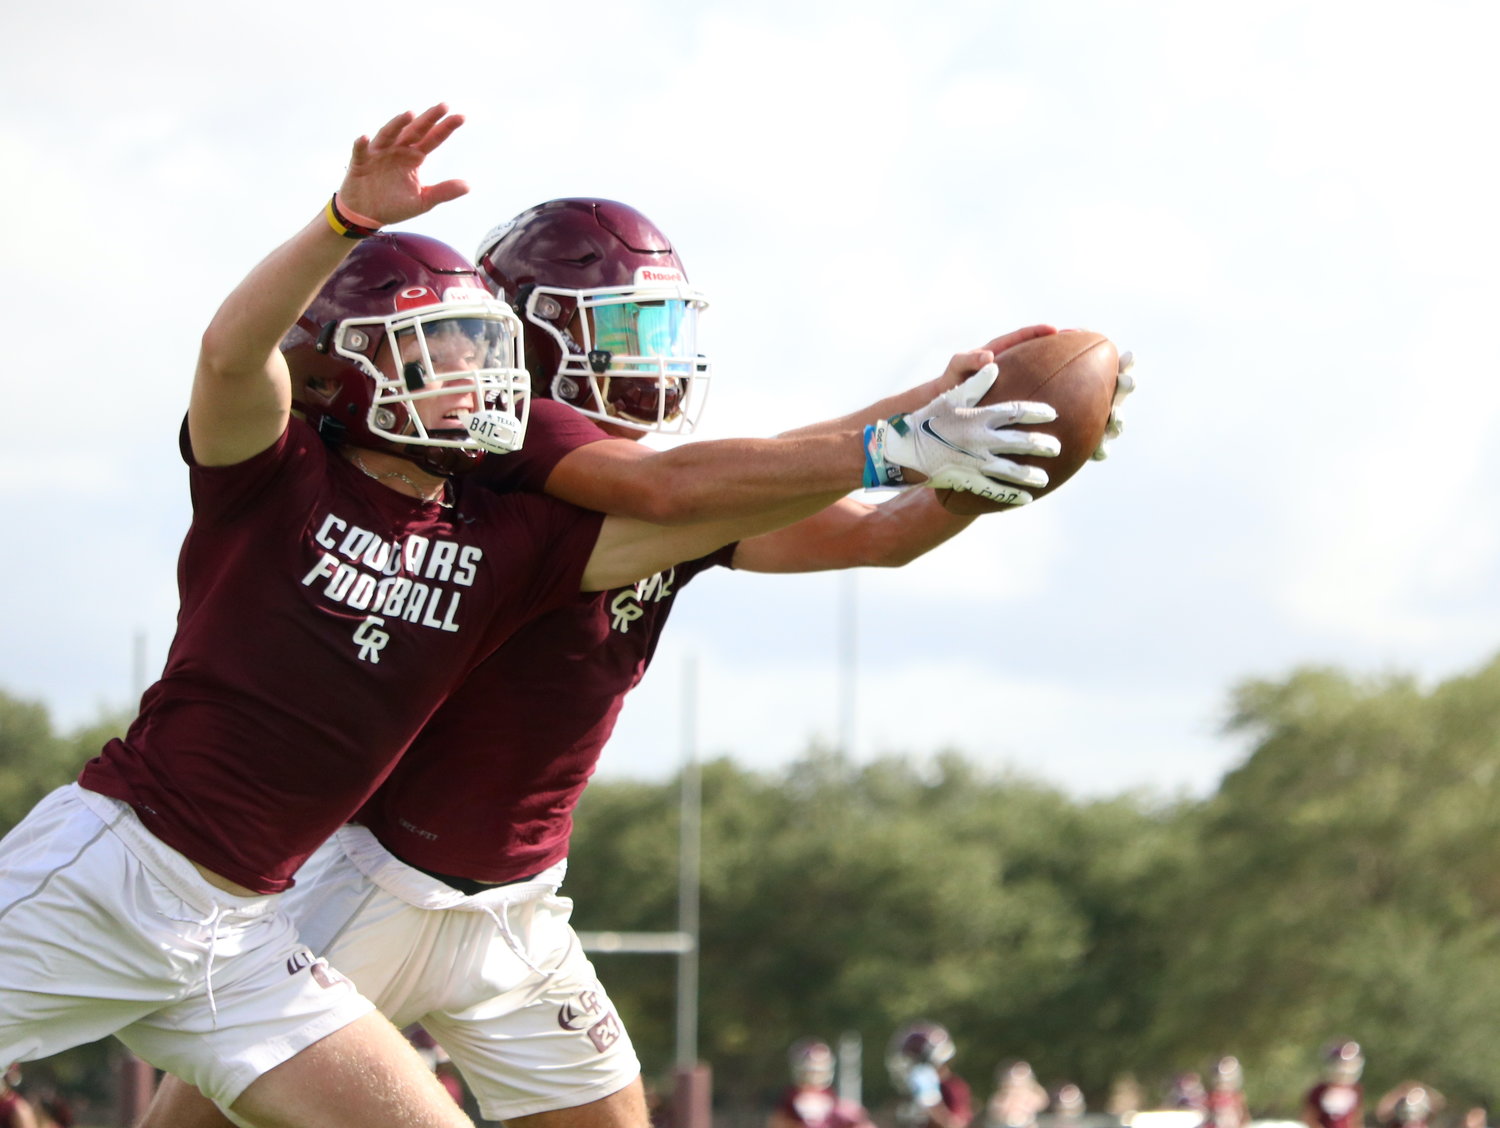 Yetxiel Perez-Gilbes knocks a pass away from a receiver during Monday’s Cinco Ranch practice.